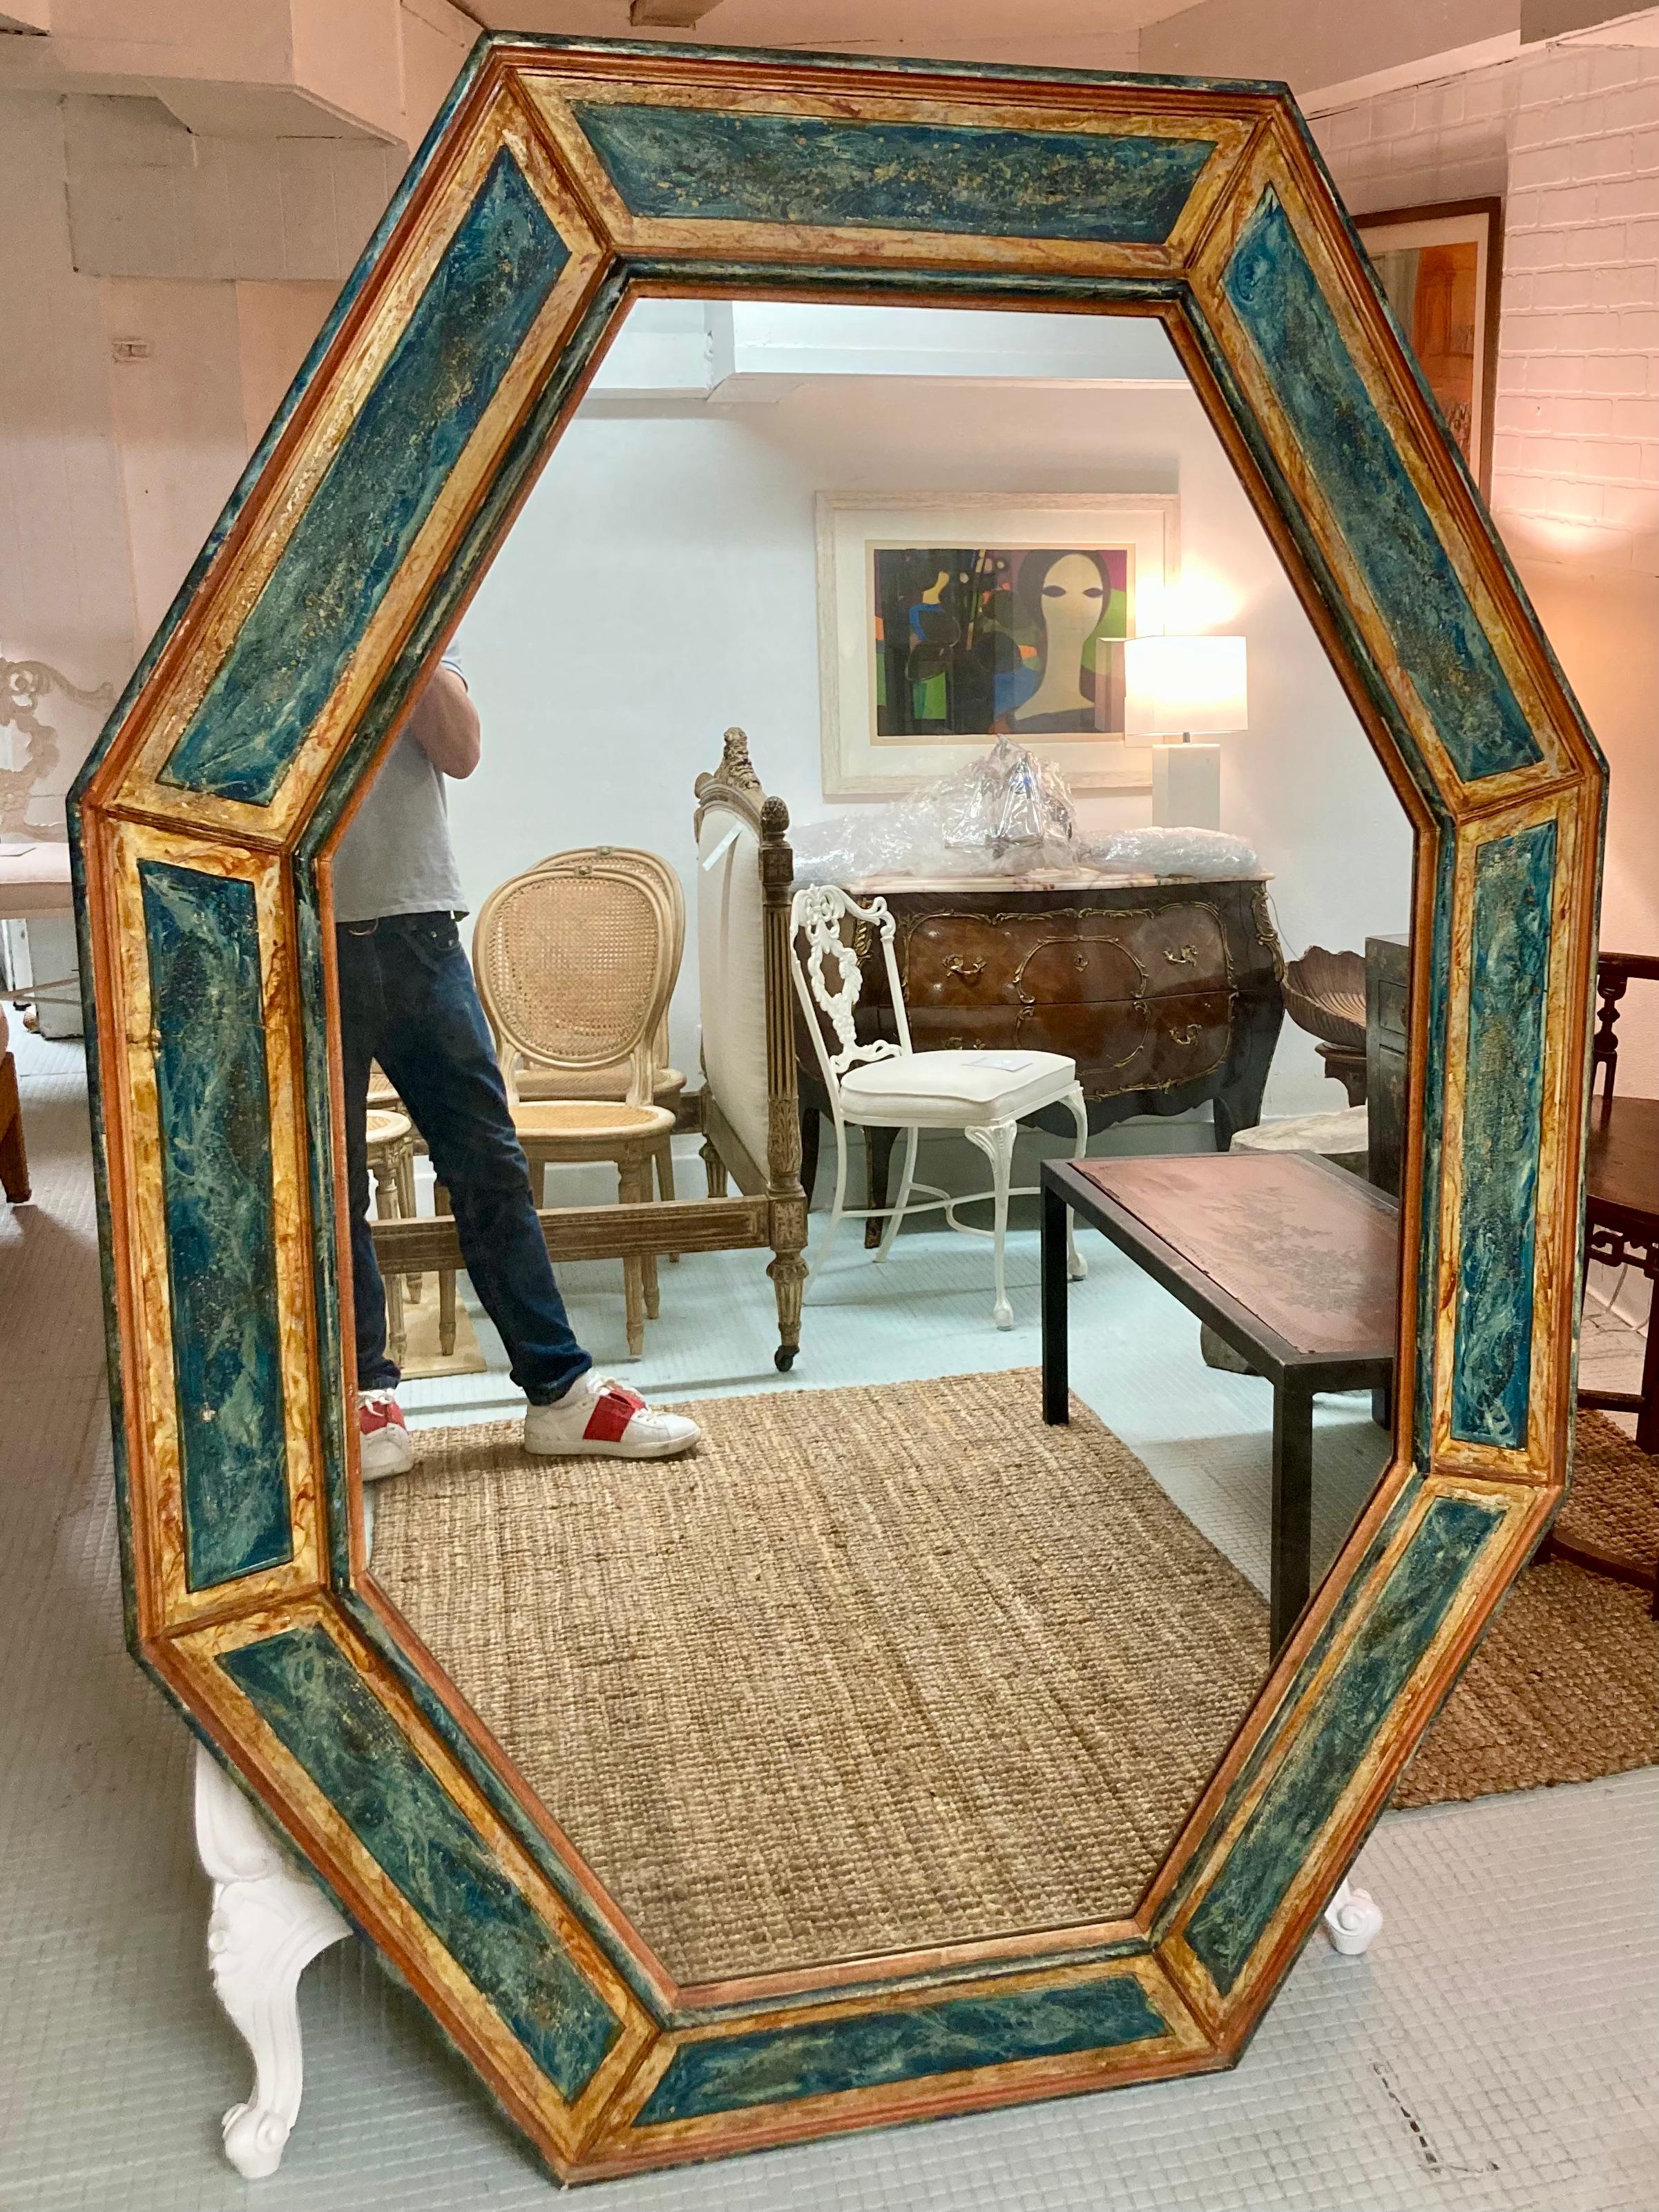 Beautiful Italian 19th Century faux marble painted mirror. Wonderfull painted details and beveled carved wood frame in an elongated octagonal shape adds drama to any room. Fun fact: this mirror is from the estate of Burl Ives.